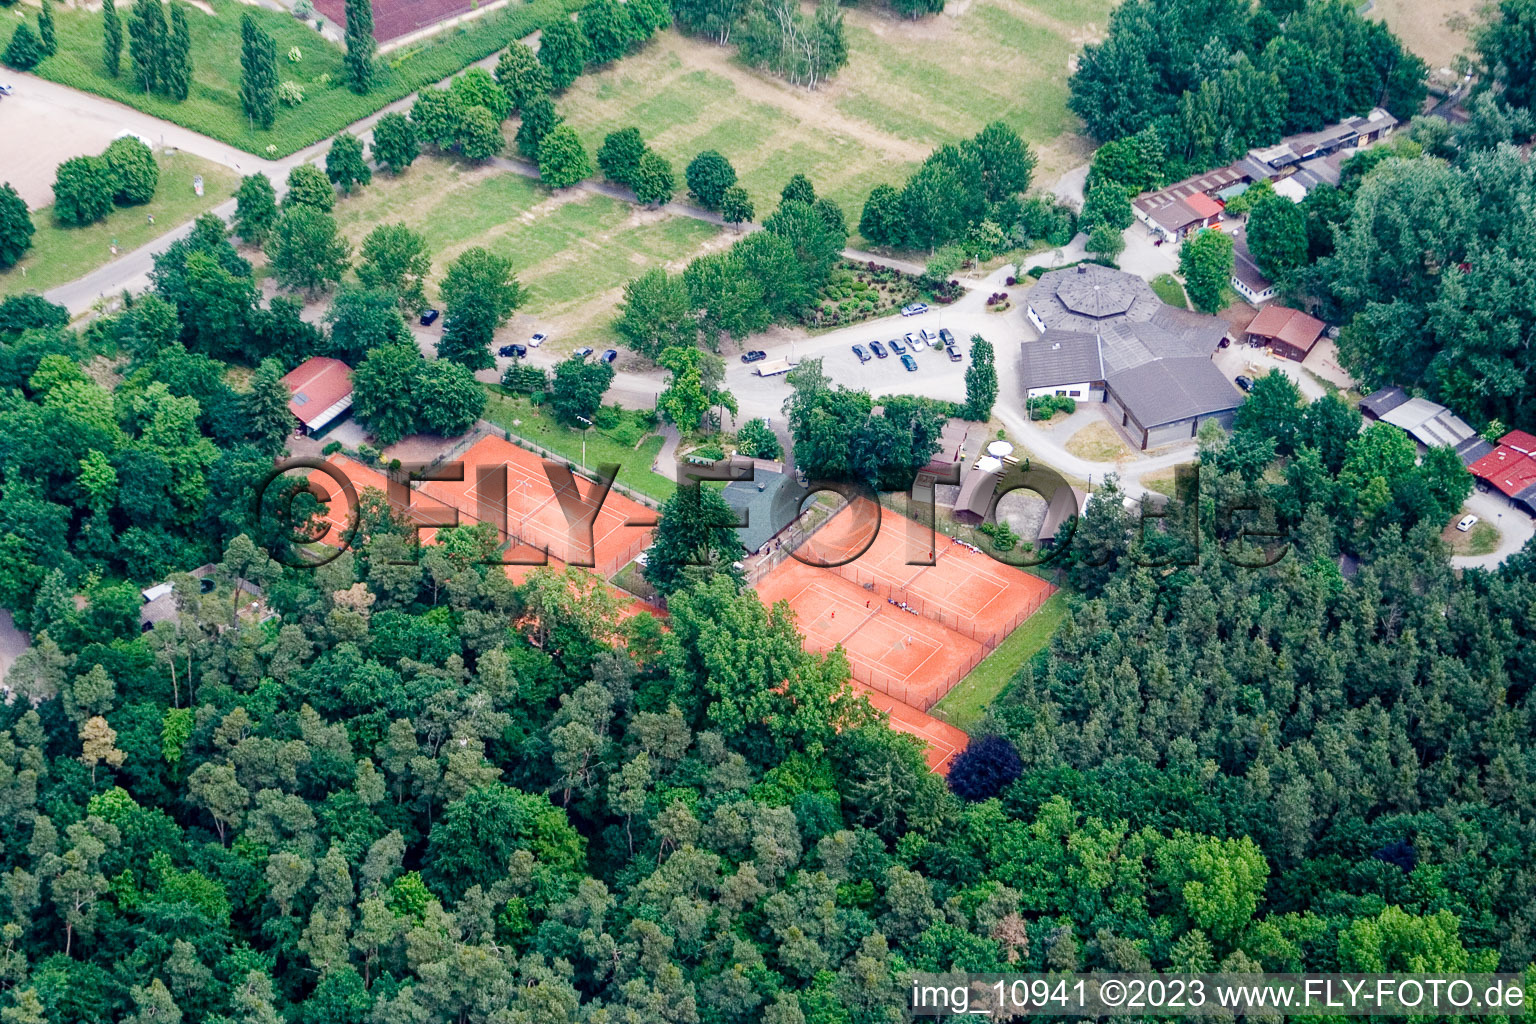 Aerial photograpy of Tennis club in Rülzheim in the state Rhineland-Palatinate, Germany